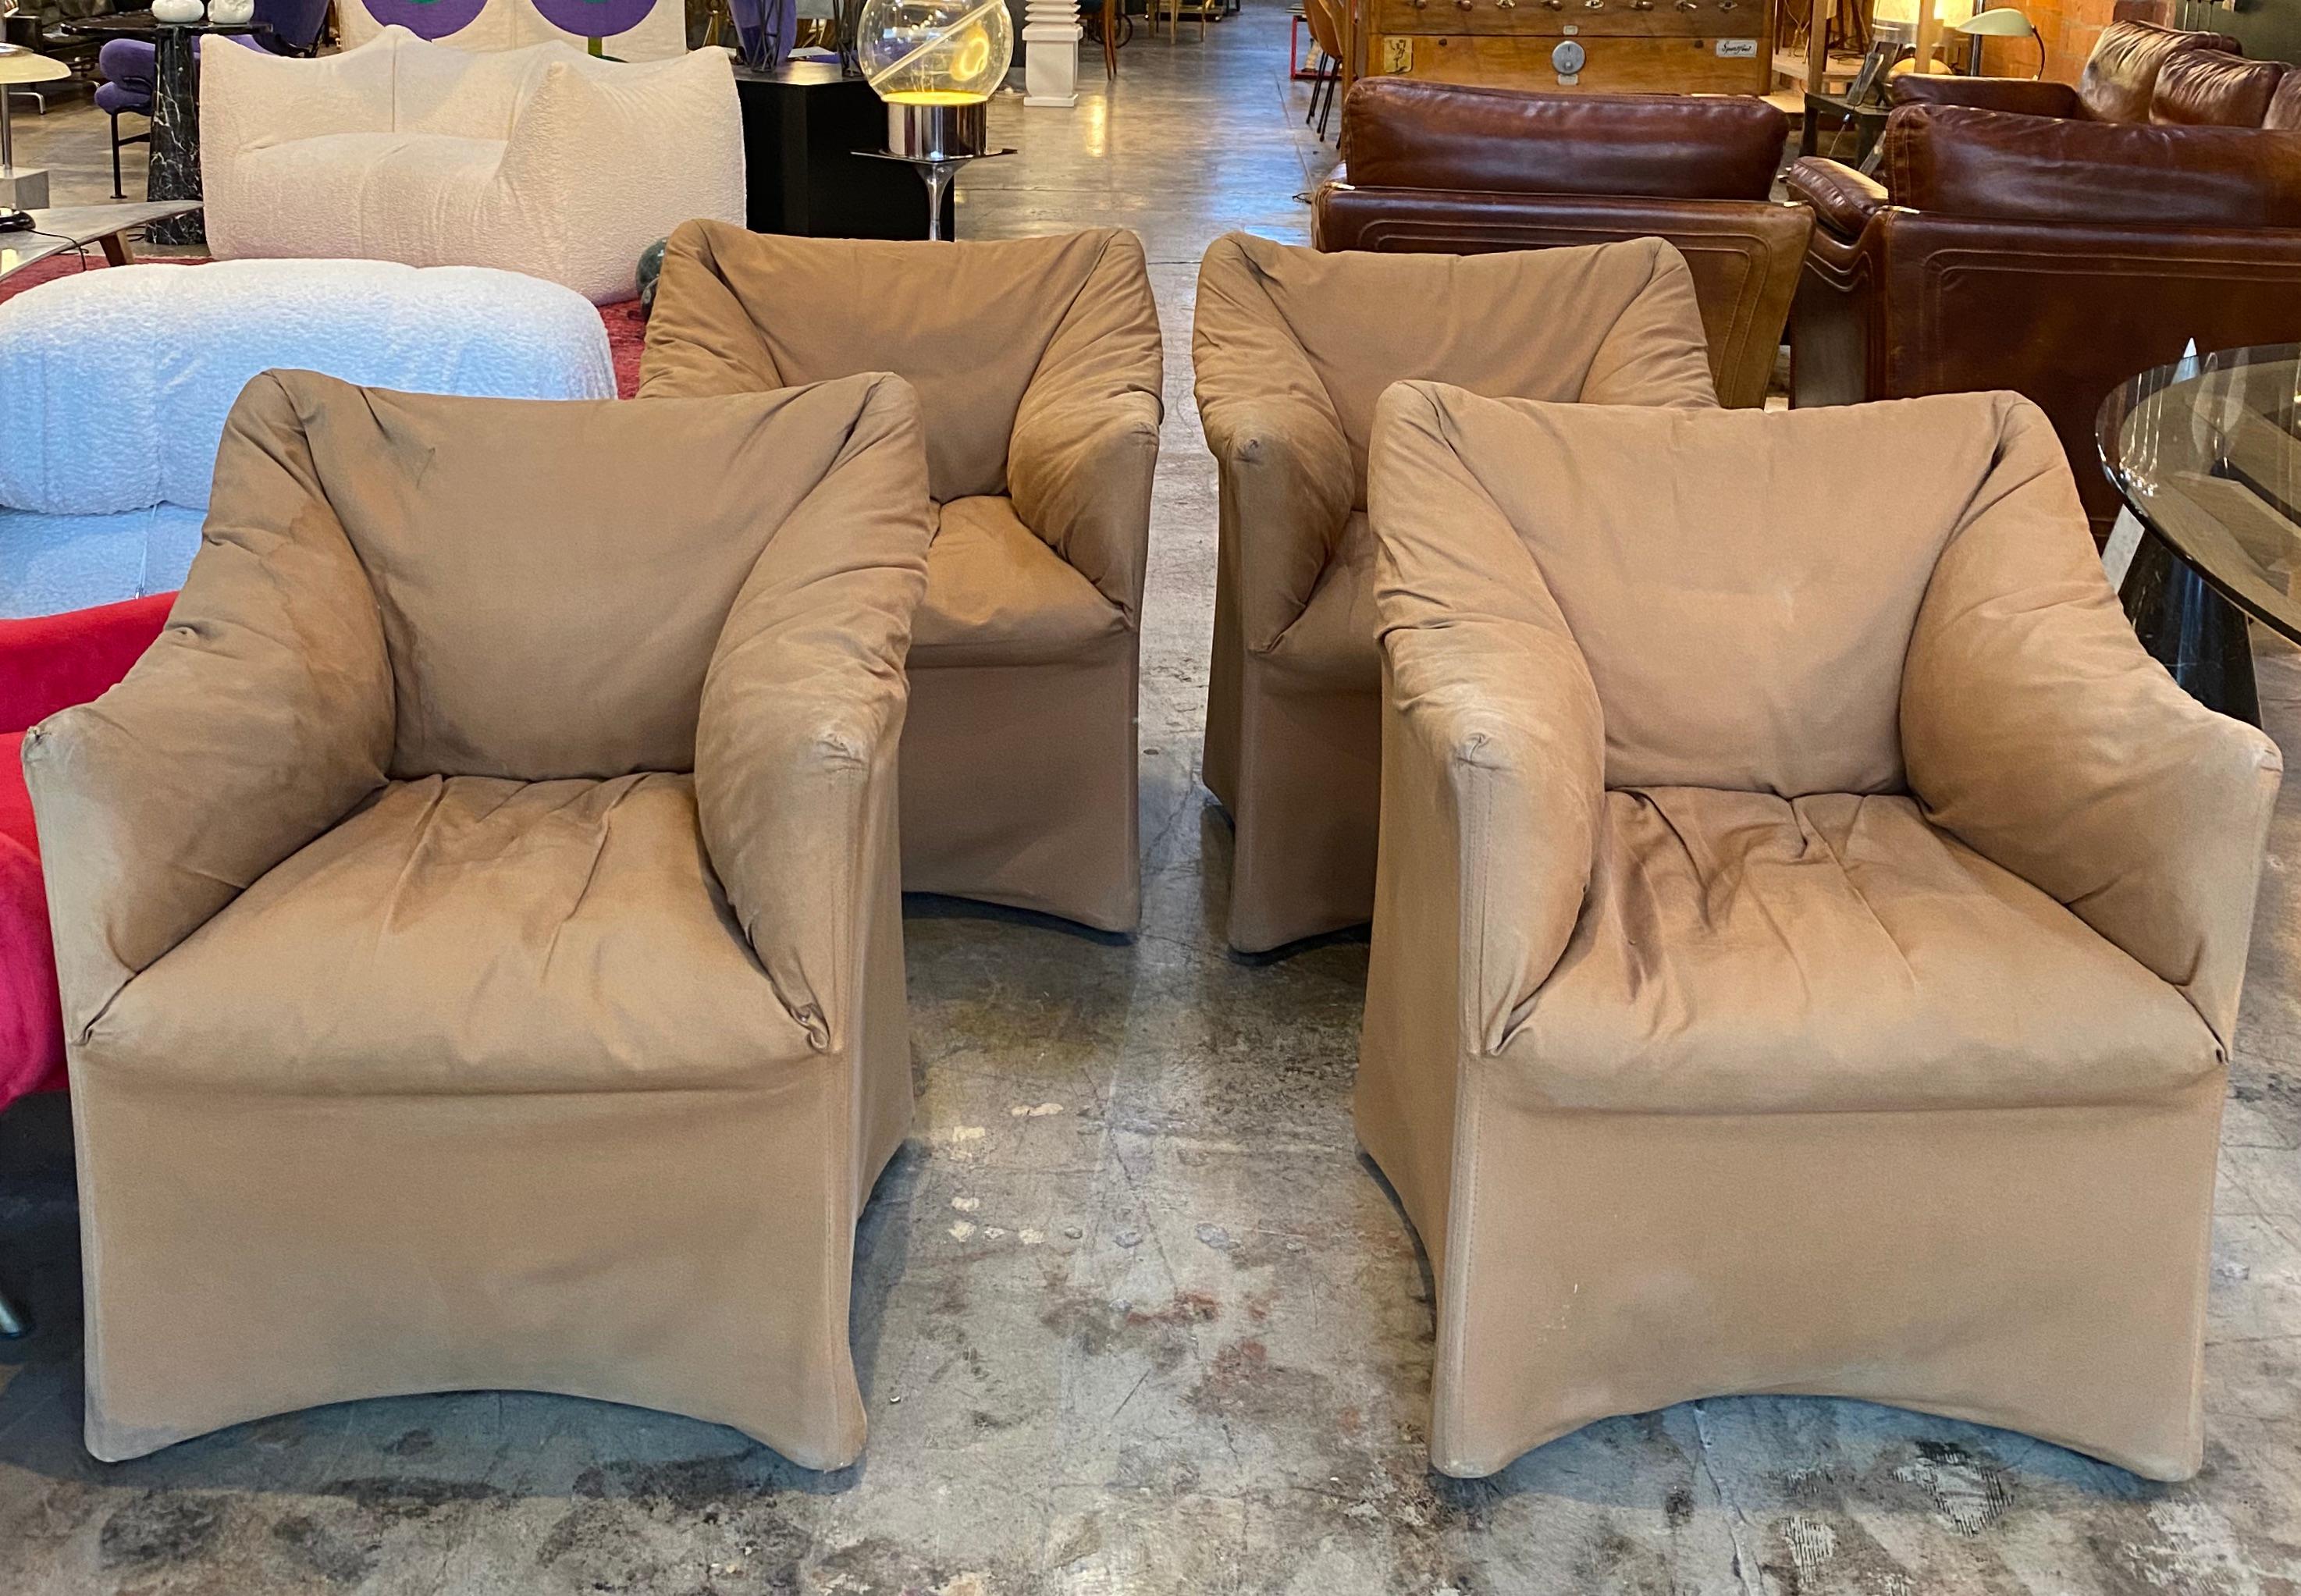 Pair of Mario Bellini Tentazione 685 Armchairs
1973

Fully insured molded soft contour form (polyurethane foam and polyester padding).
Frame: steel construction on casters.

Tentazione means temptation an inviting tempting design with